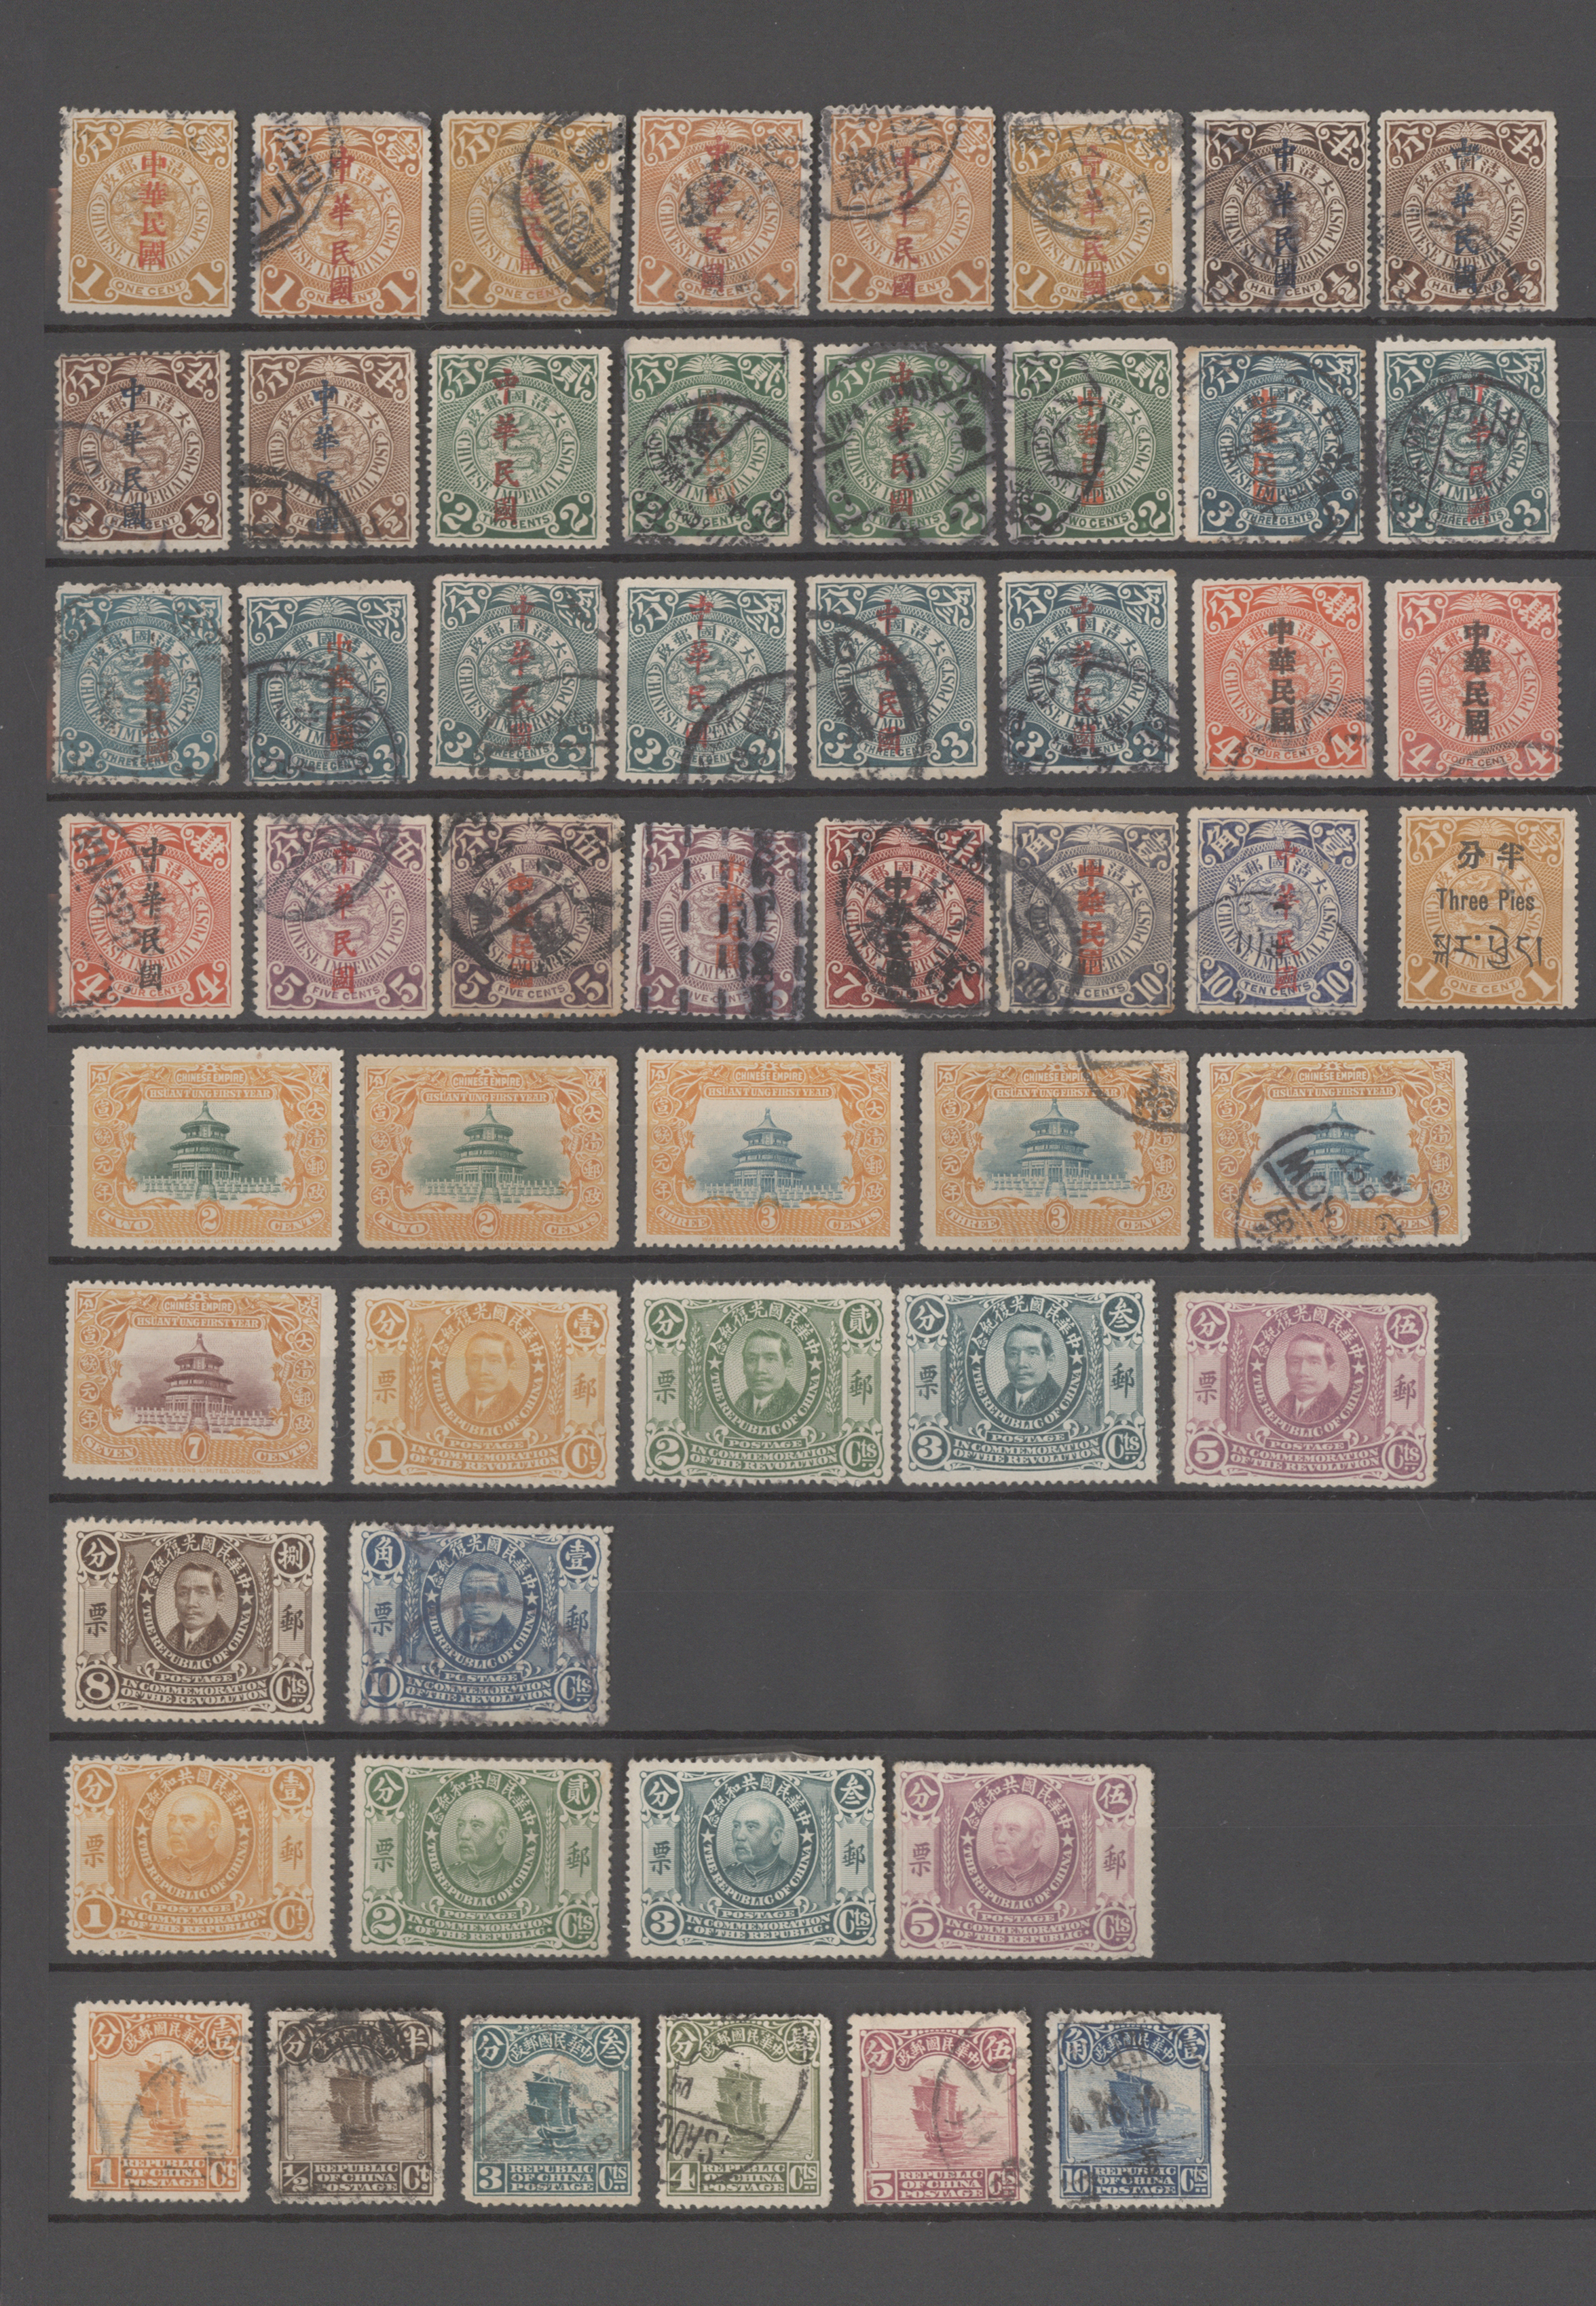 Lot 7177 - China  -  Auktionshaus Christoph Gärtner GmbH & Co. KG 54th AUCTION - Day 4